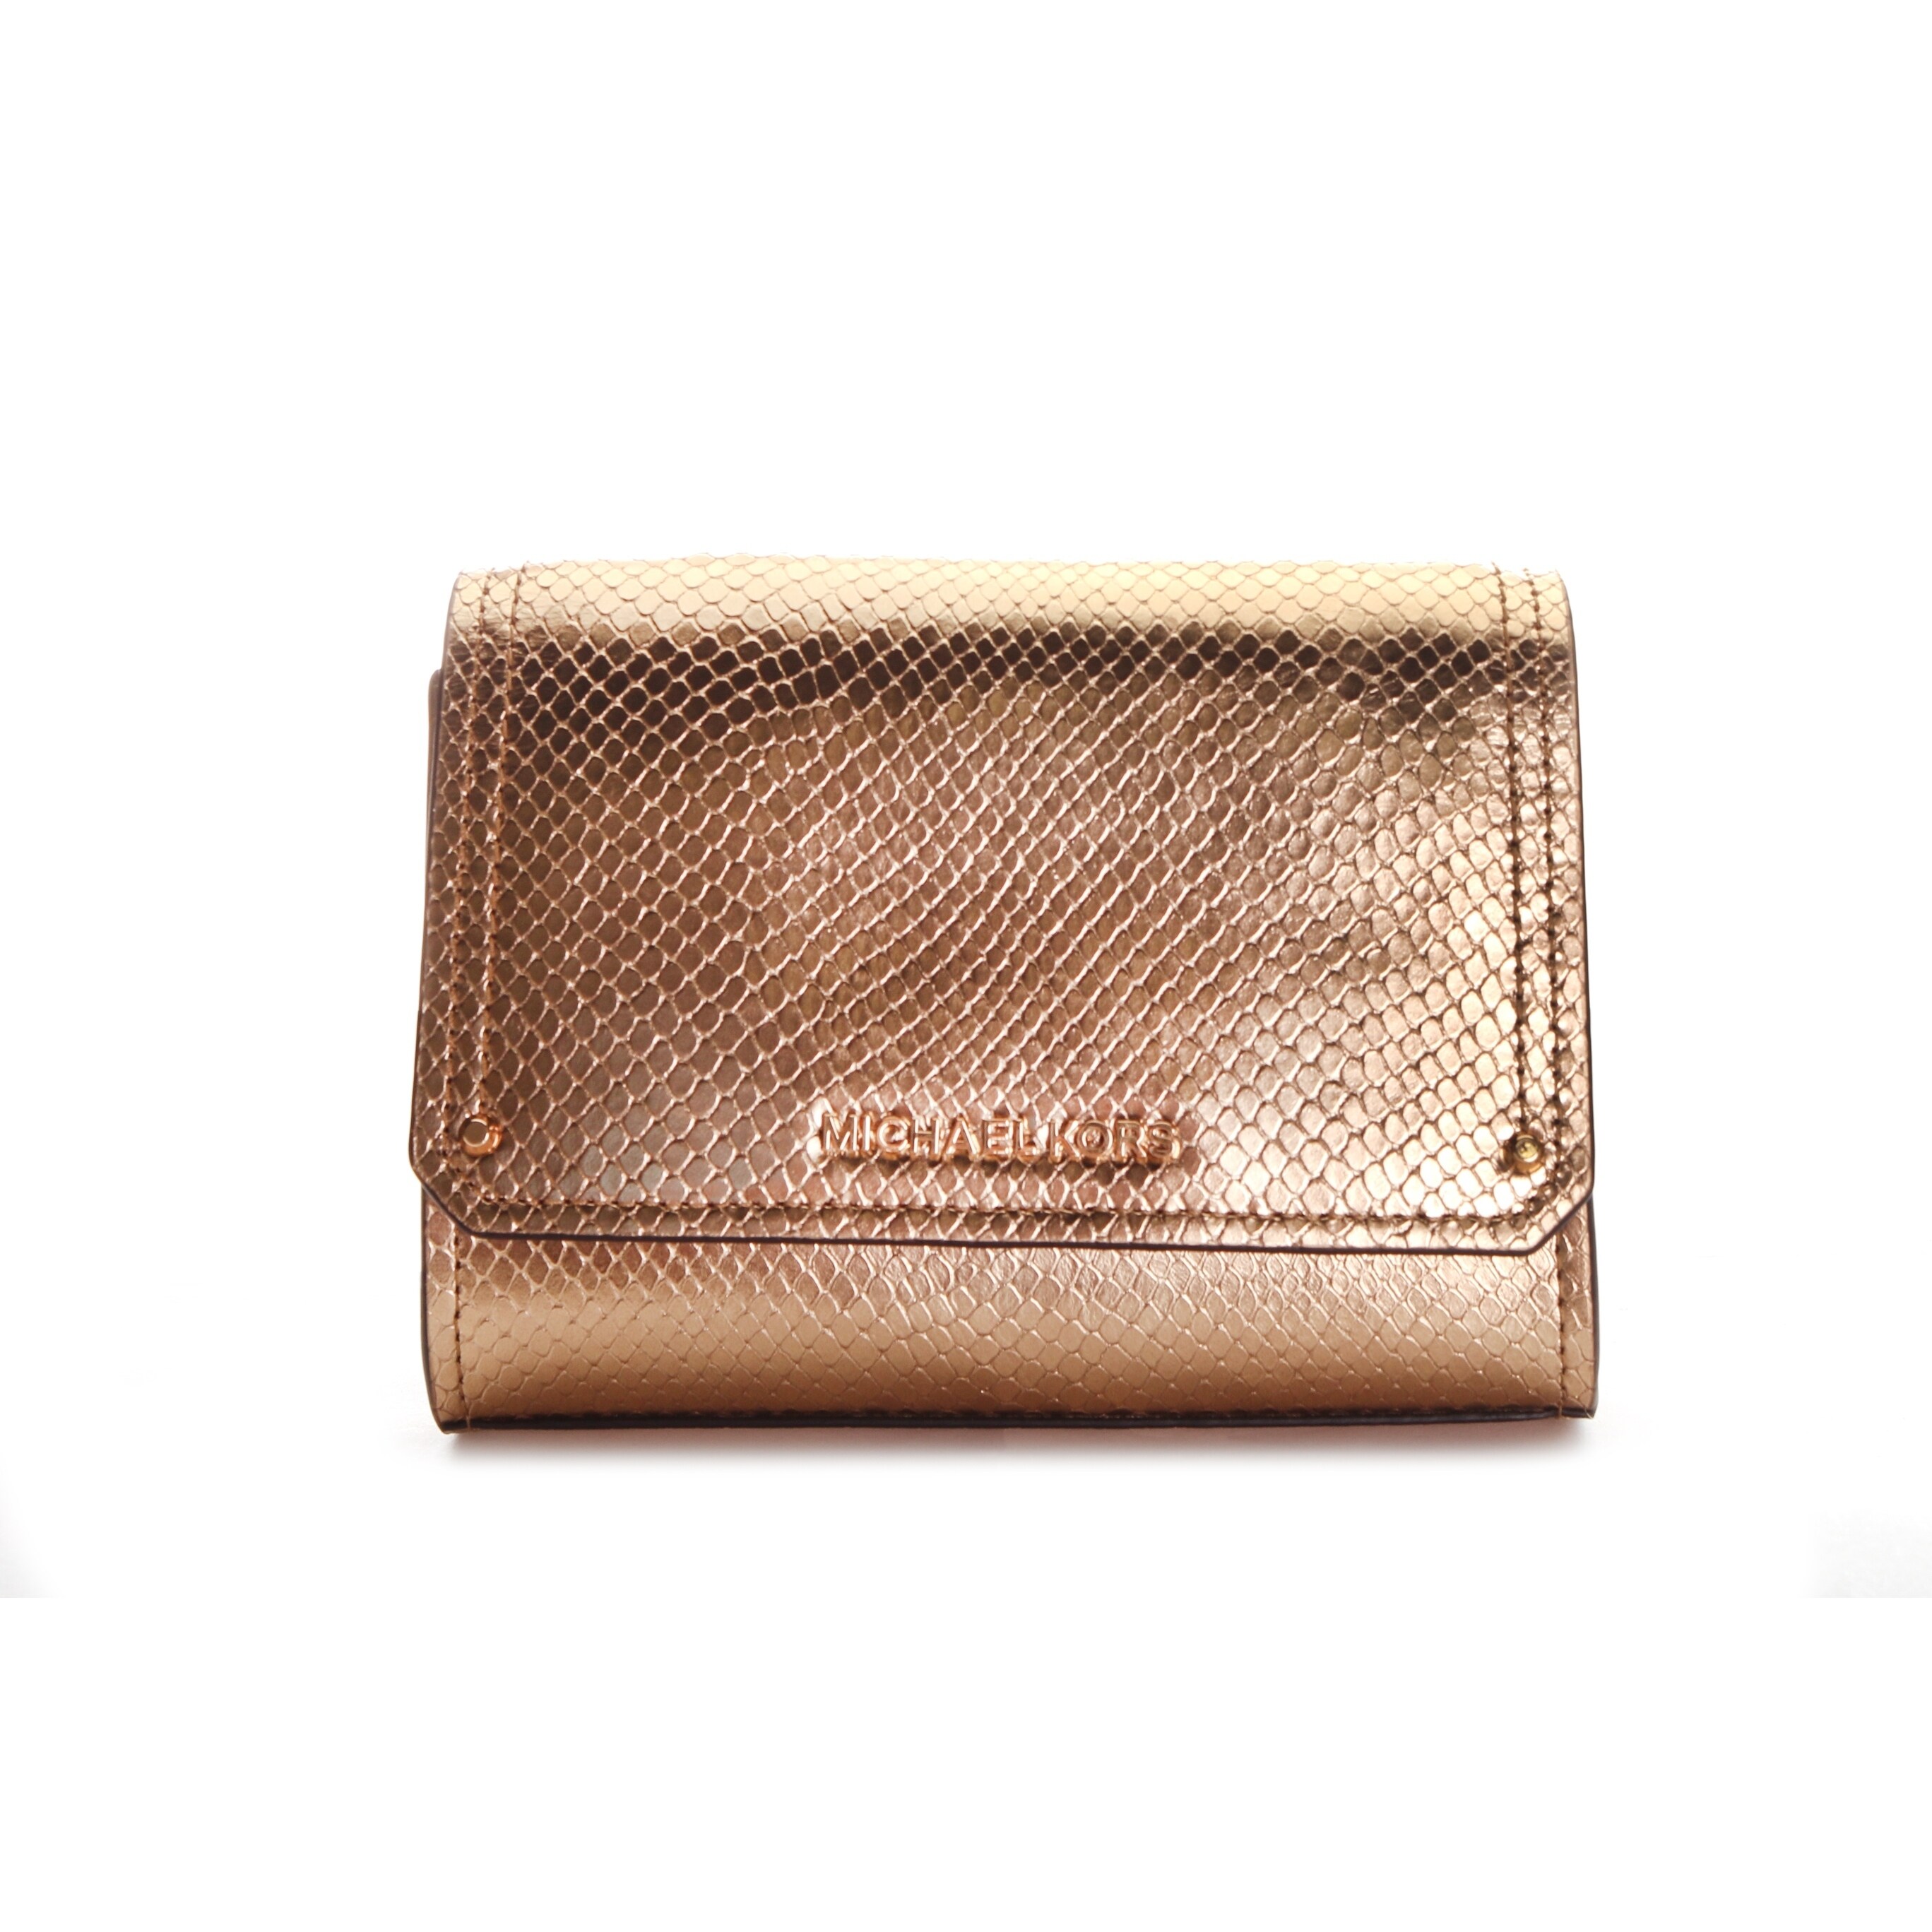 michael kors hayes small clutch